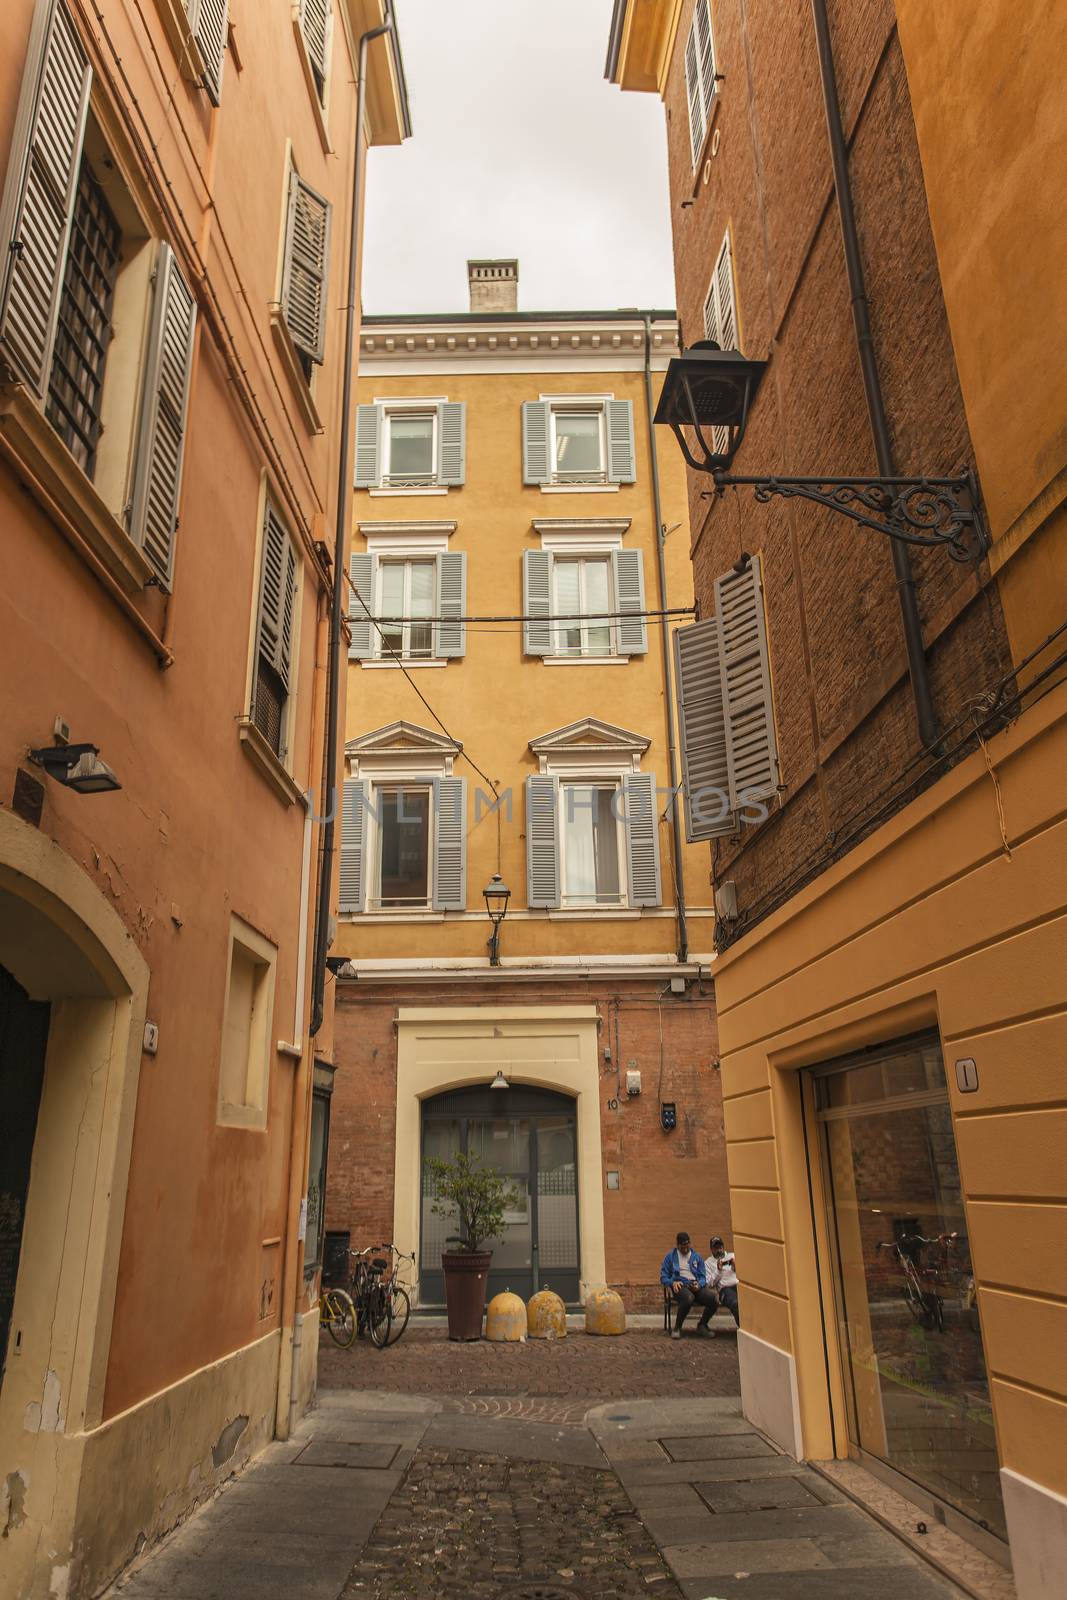 Modena's alley with historic buildings by pippocarlot